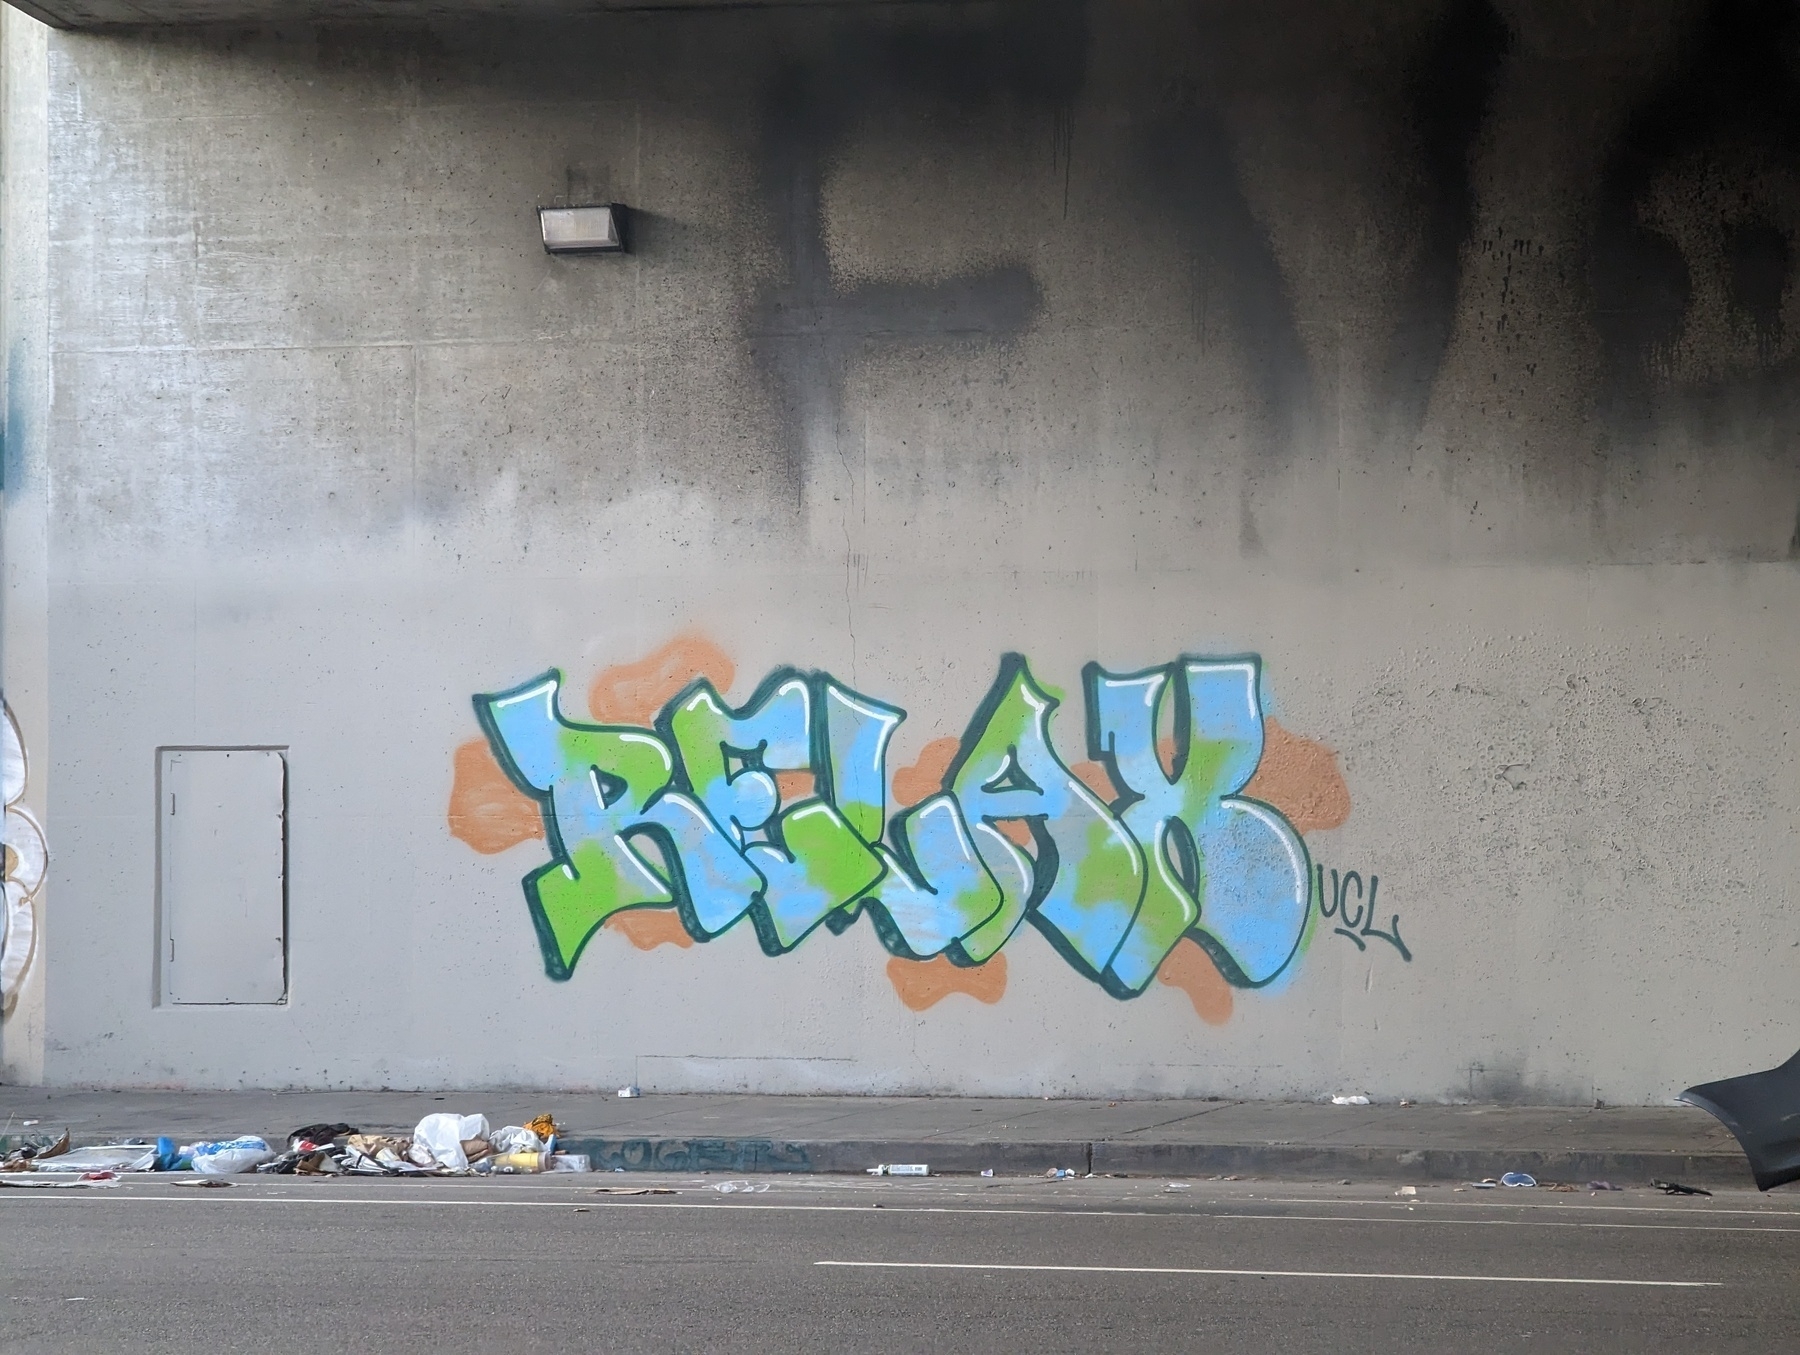 The word "Relax" is sprayed next to its artist tag "UCL" in graffiti with black outlining, blue and green coloring inside and orange patterns around it against a gray concrete wall above a mostly bare sidewalk and curb under an Interstate 980 overpass along 27th Street west of Northgate Avenue Tuesday, May 23, 2023 in Oakland, California.